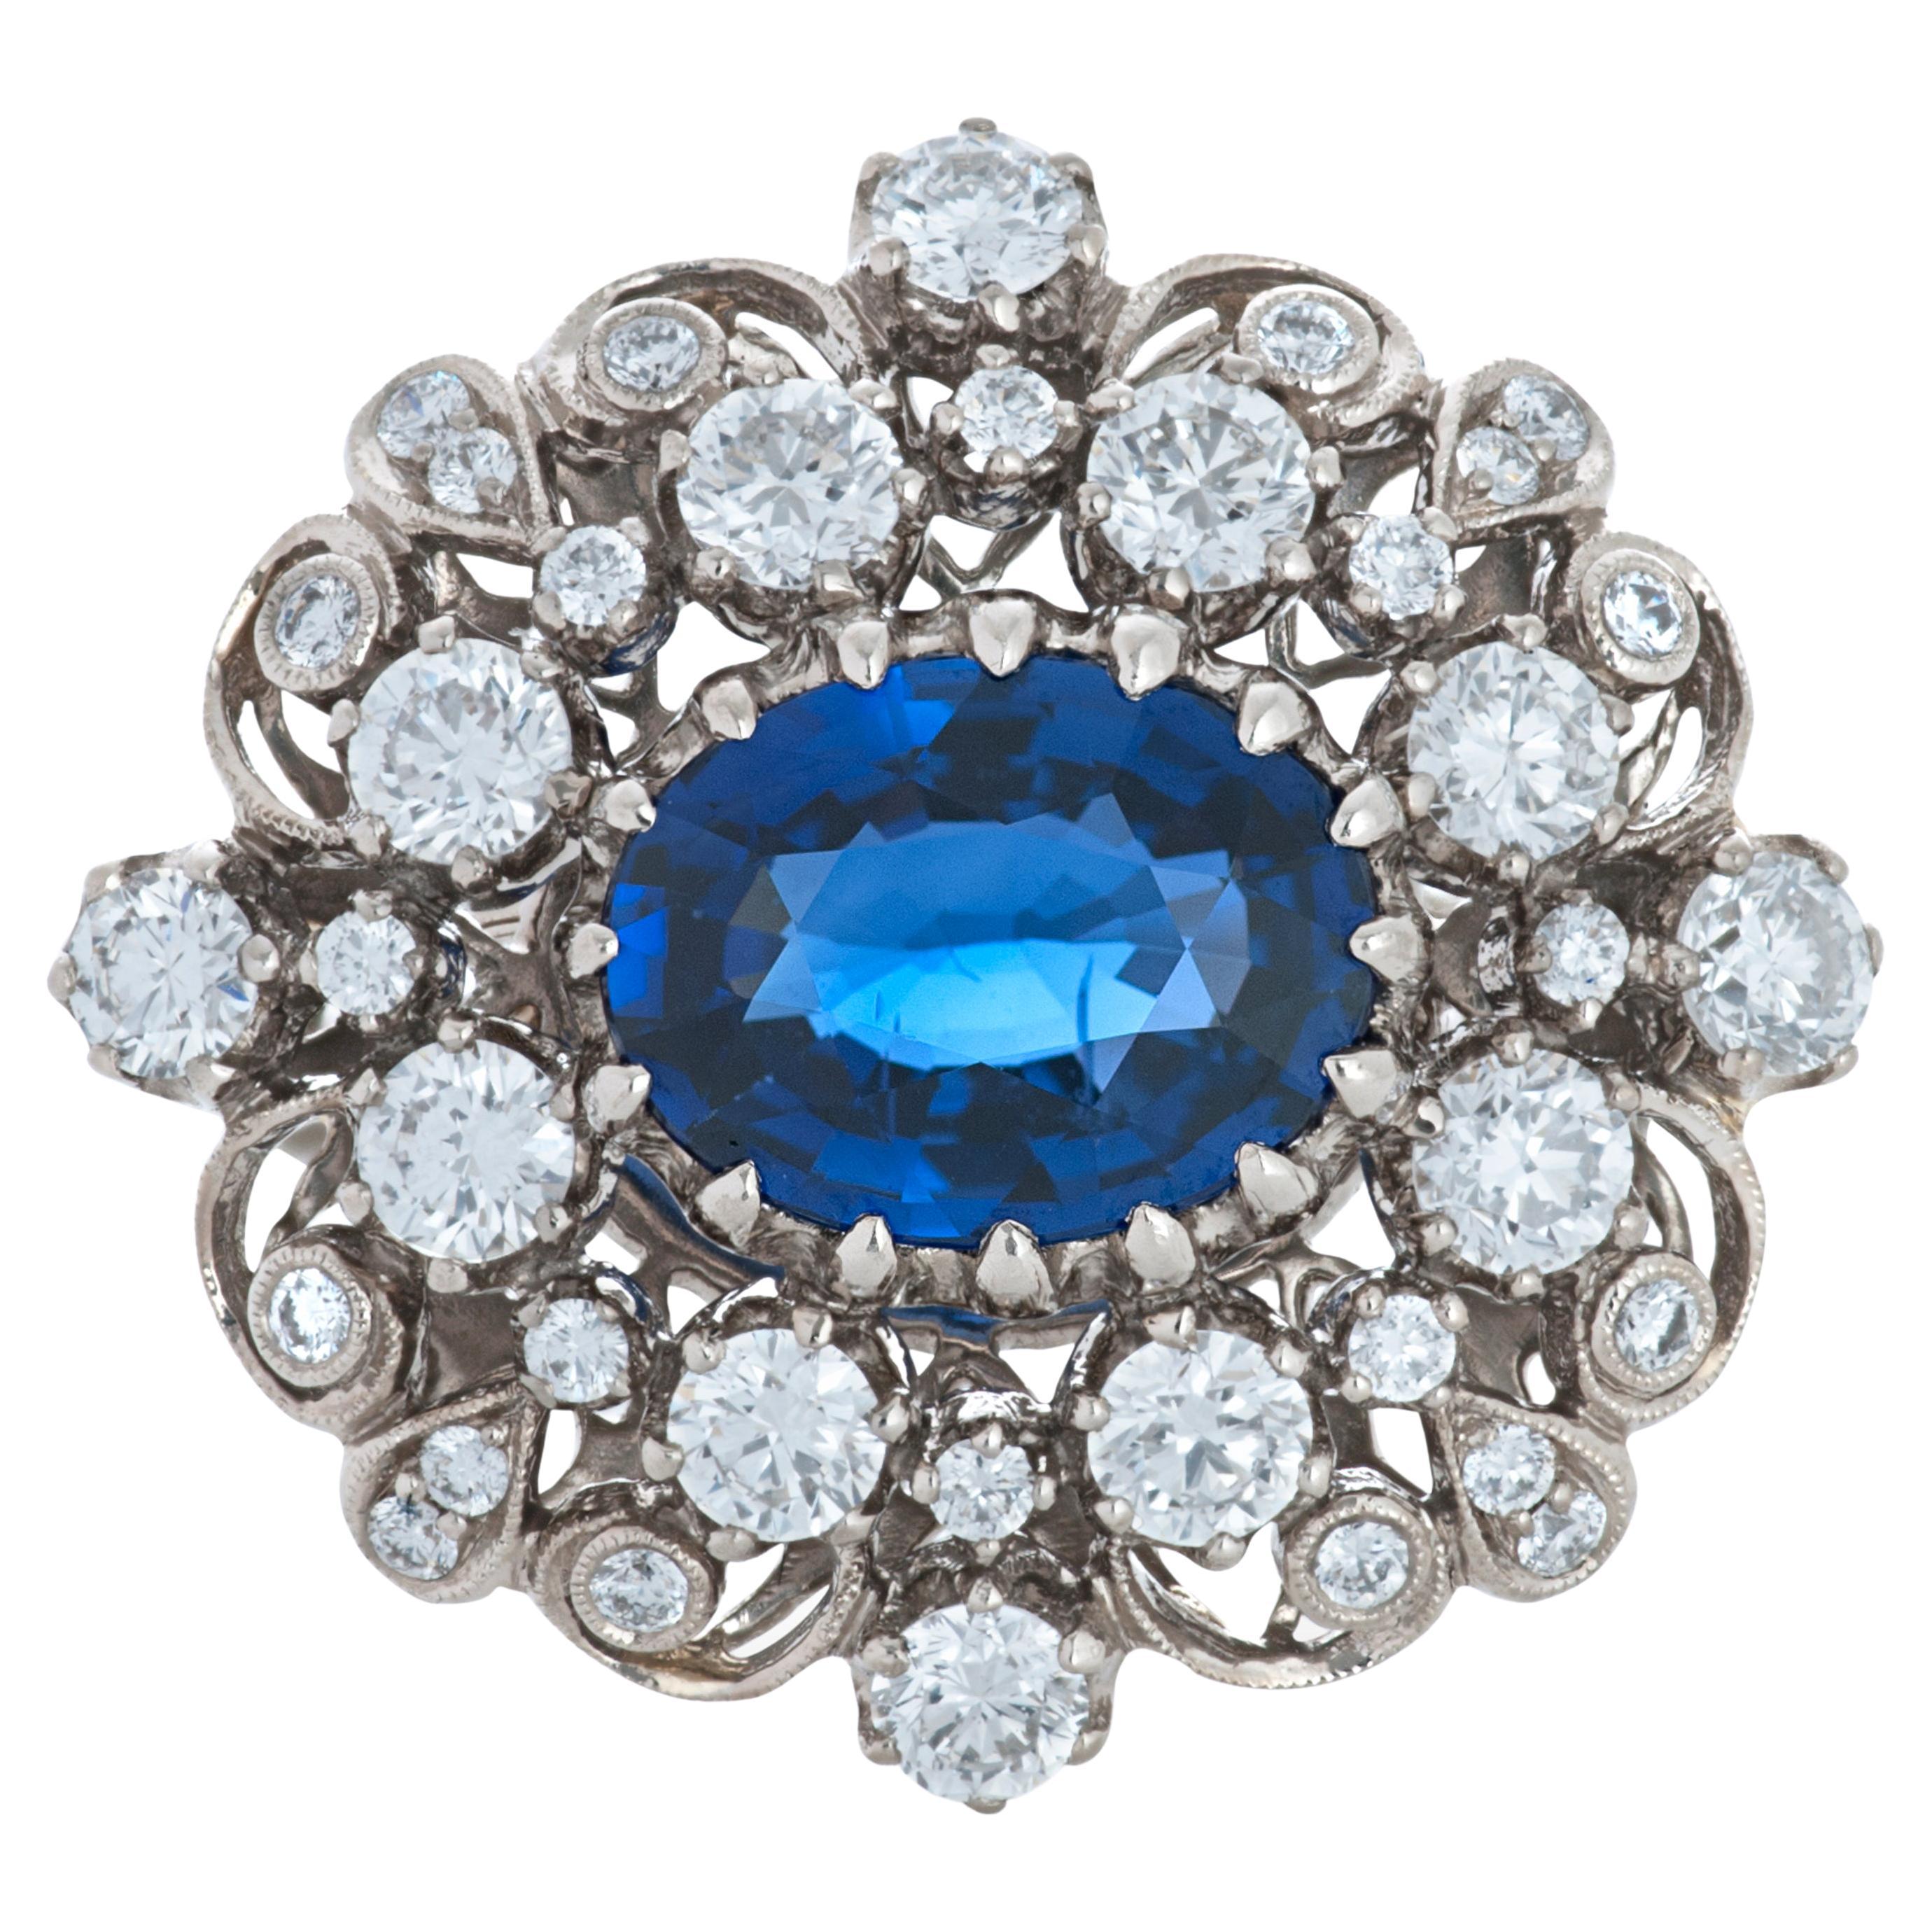 Kwiat Vintage Collection Art Deco style sapphire and diamond 18k white gold ring.  

The center stone of this ring is a 2.00 carat oval sapphire surrounded by 36 round diamonds totaling approximately 1.00 carat with estimated G-H color and VS